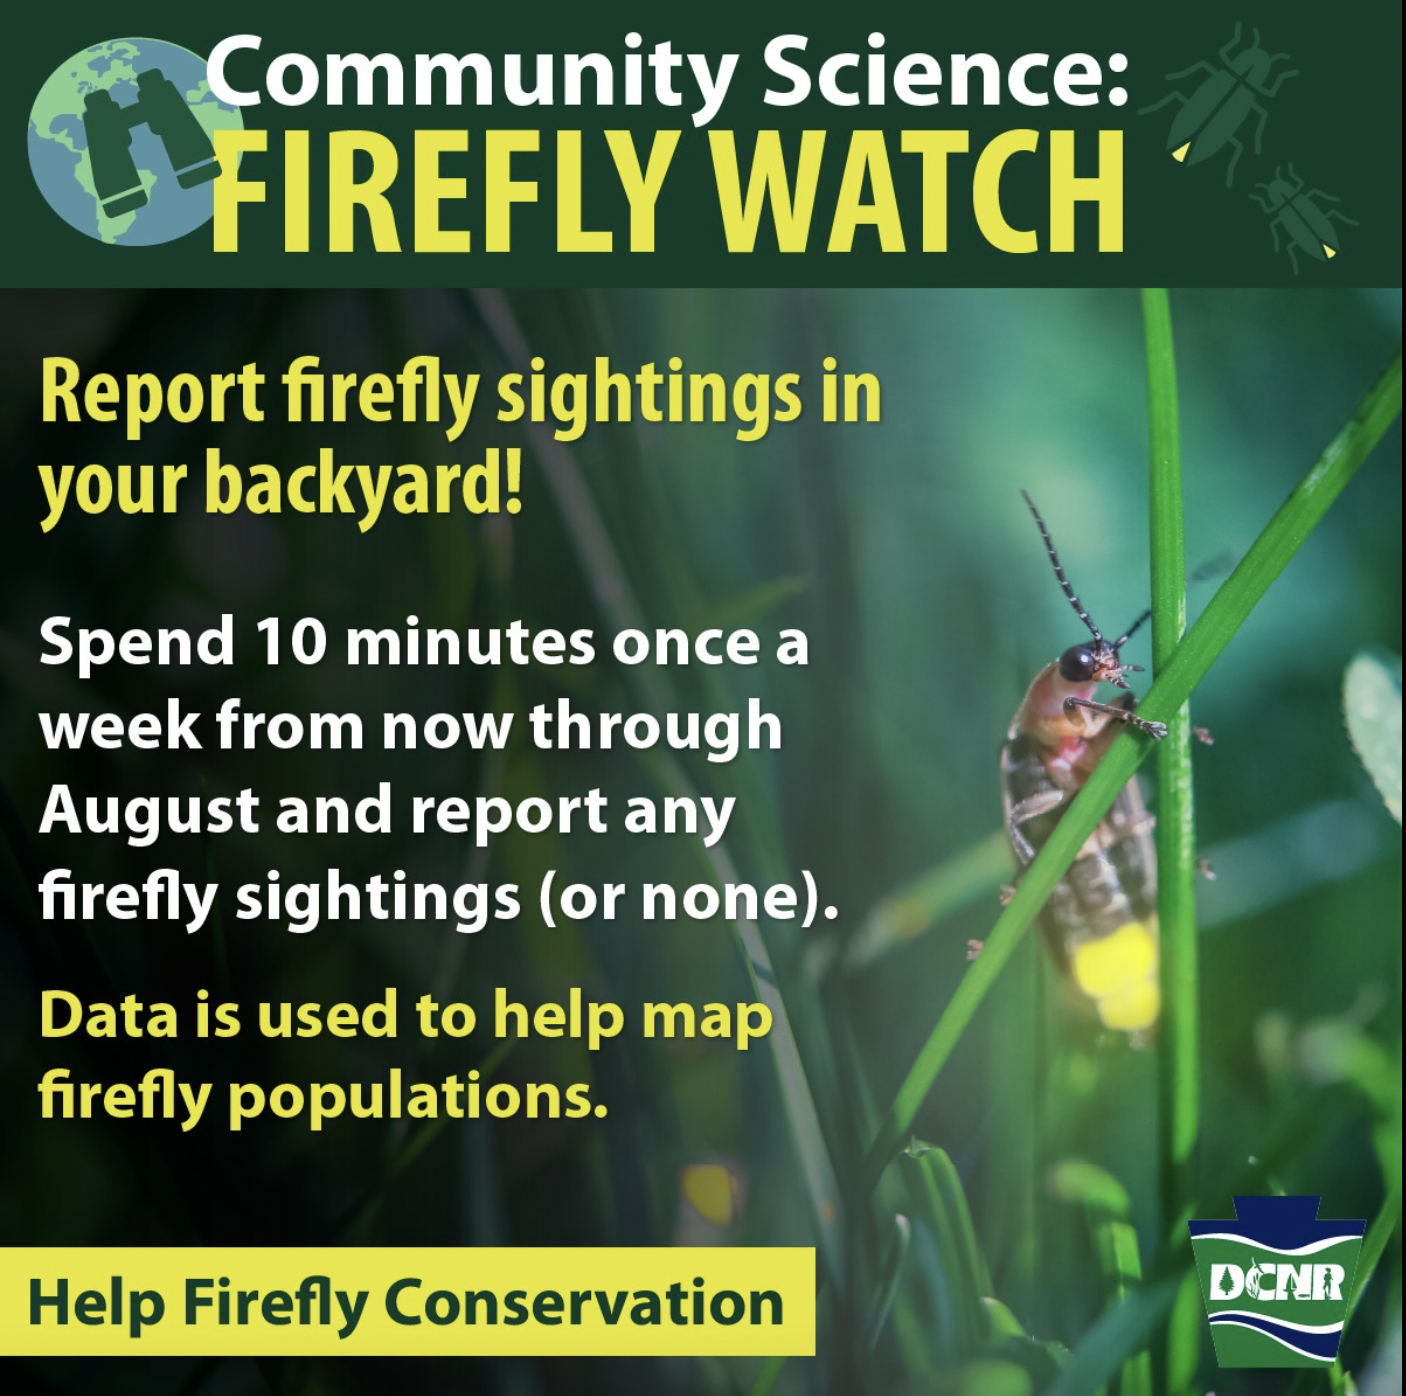 Firefly Watch Pro Community Science Training | North Shore Kid and Family  Fun in Massachusetts for North Shore Children, Families, Events, Activities  Calendar Resource Guide